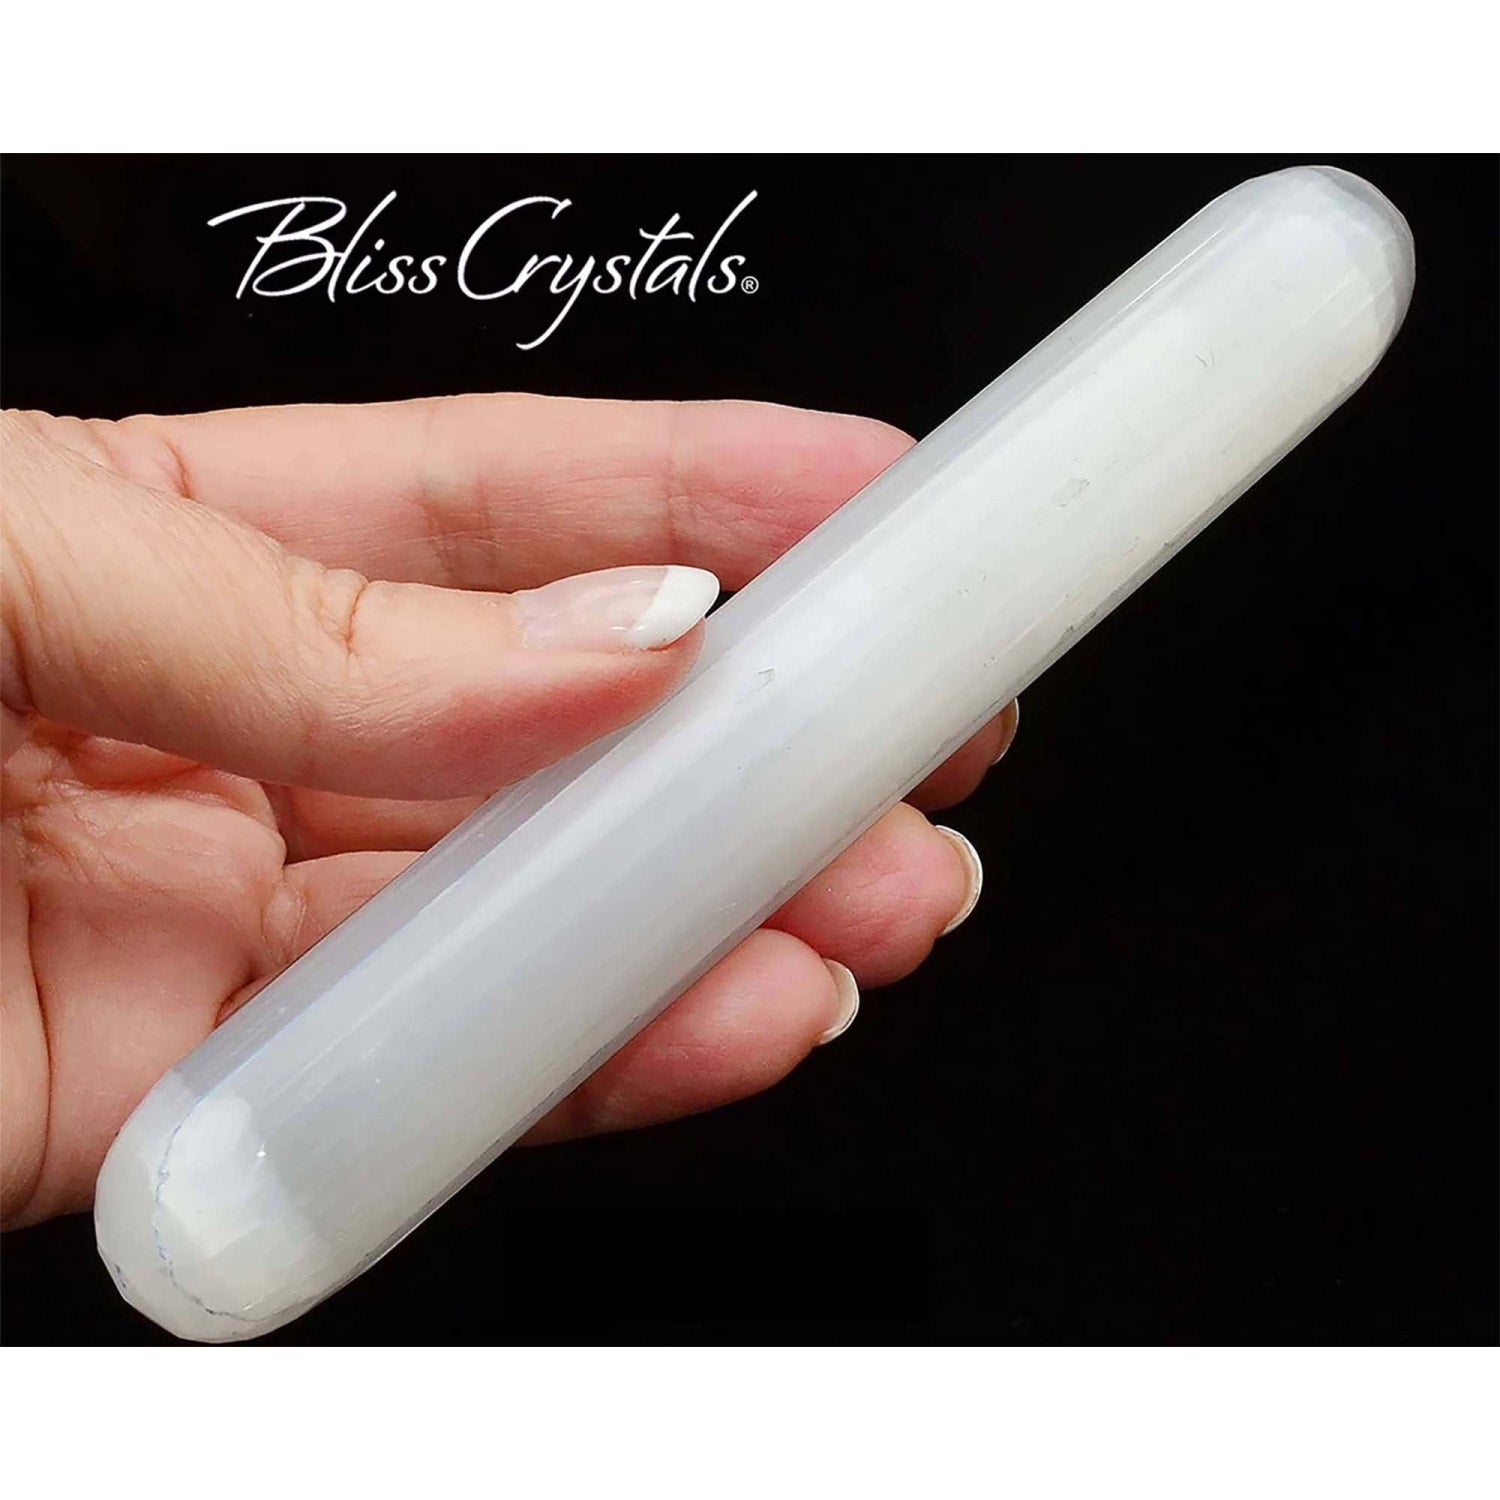 https://cdn.shopify.com/s/files/1/1869/1587/products/6-inch-selenite-wand-tapered-ends-sw29-919.jpg?v=1666165420